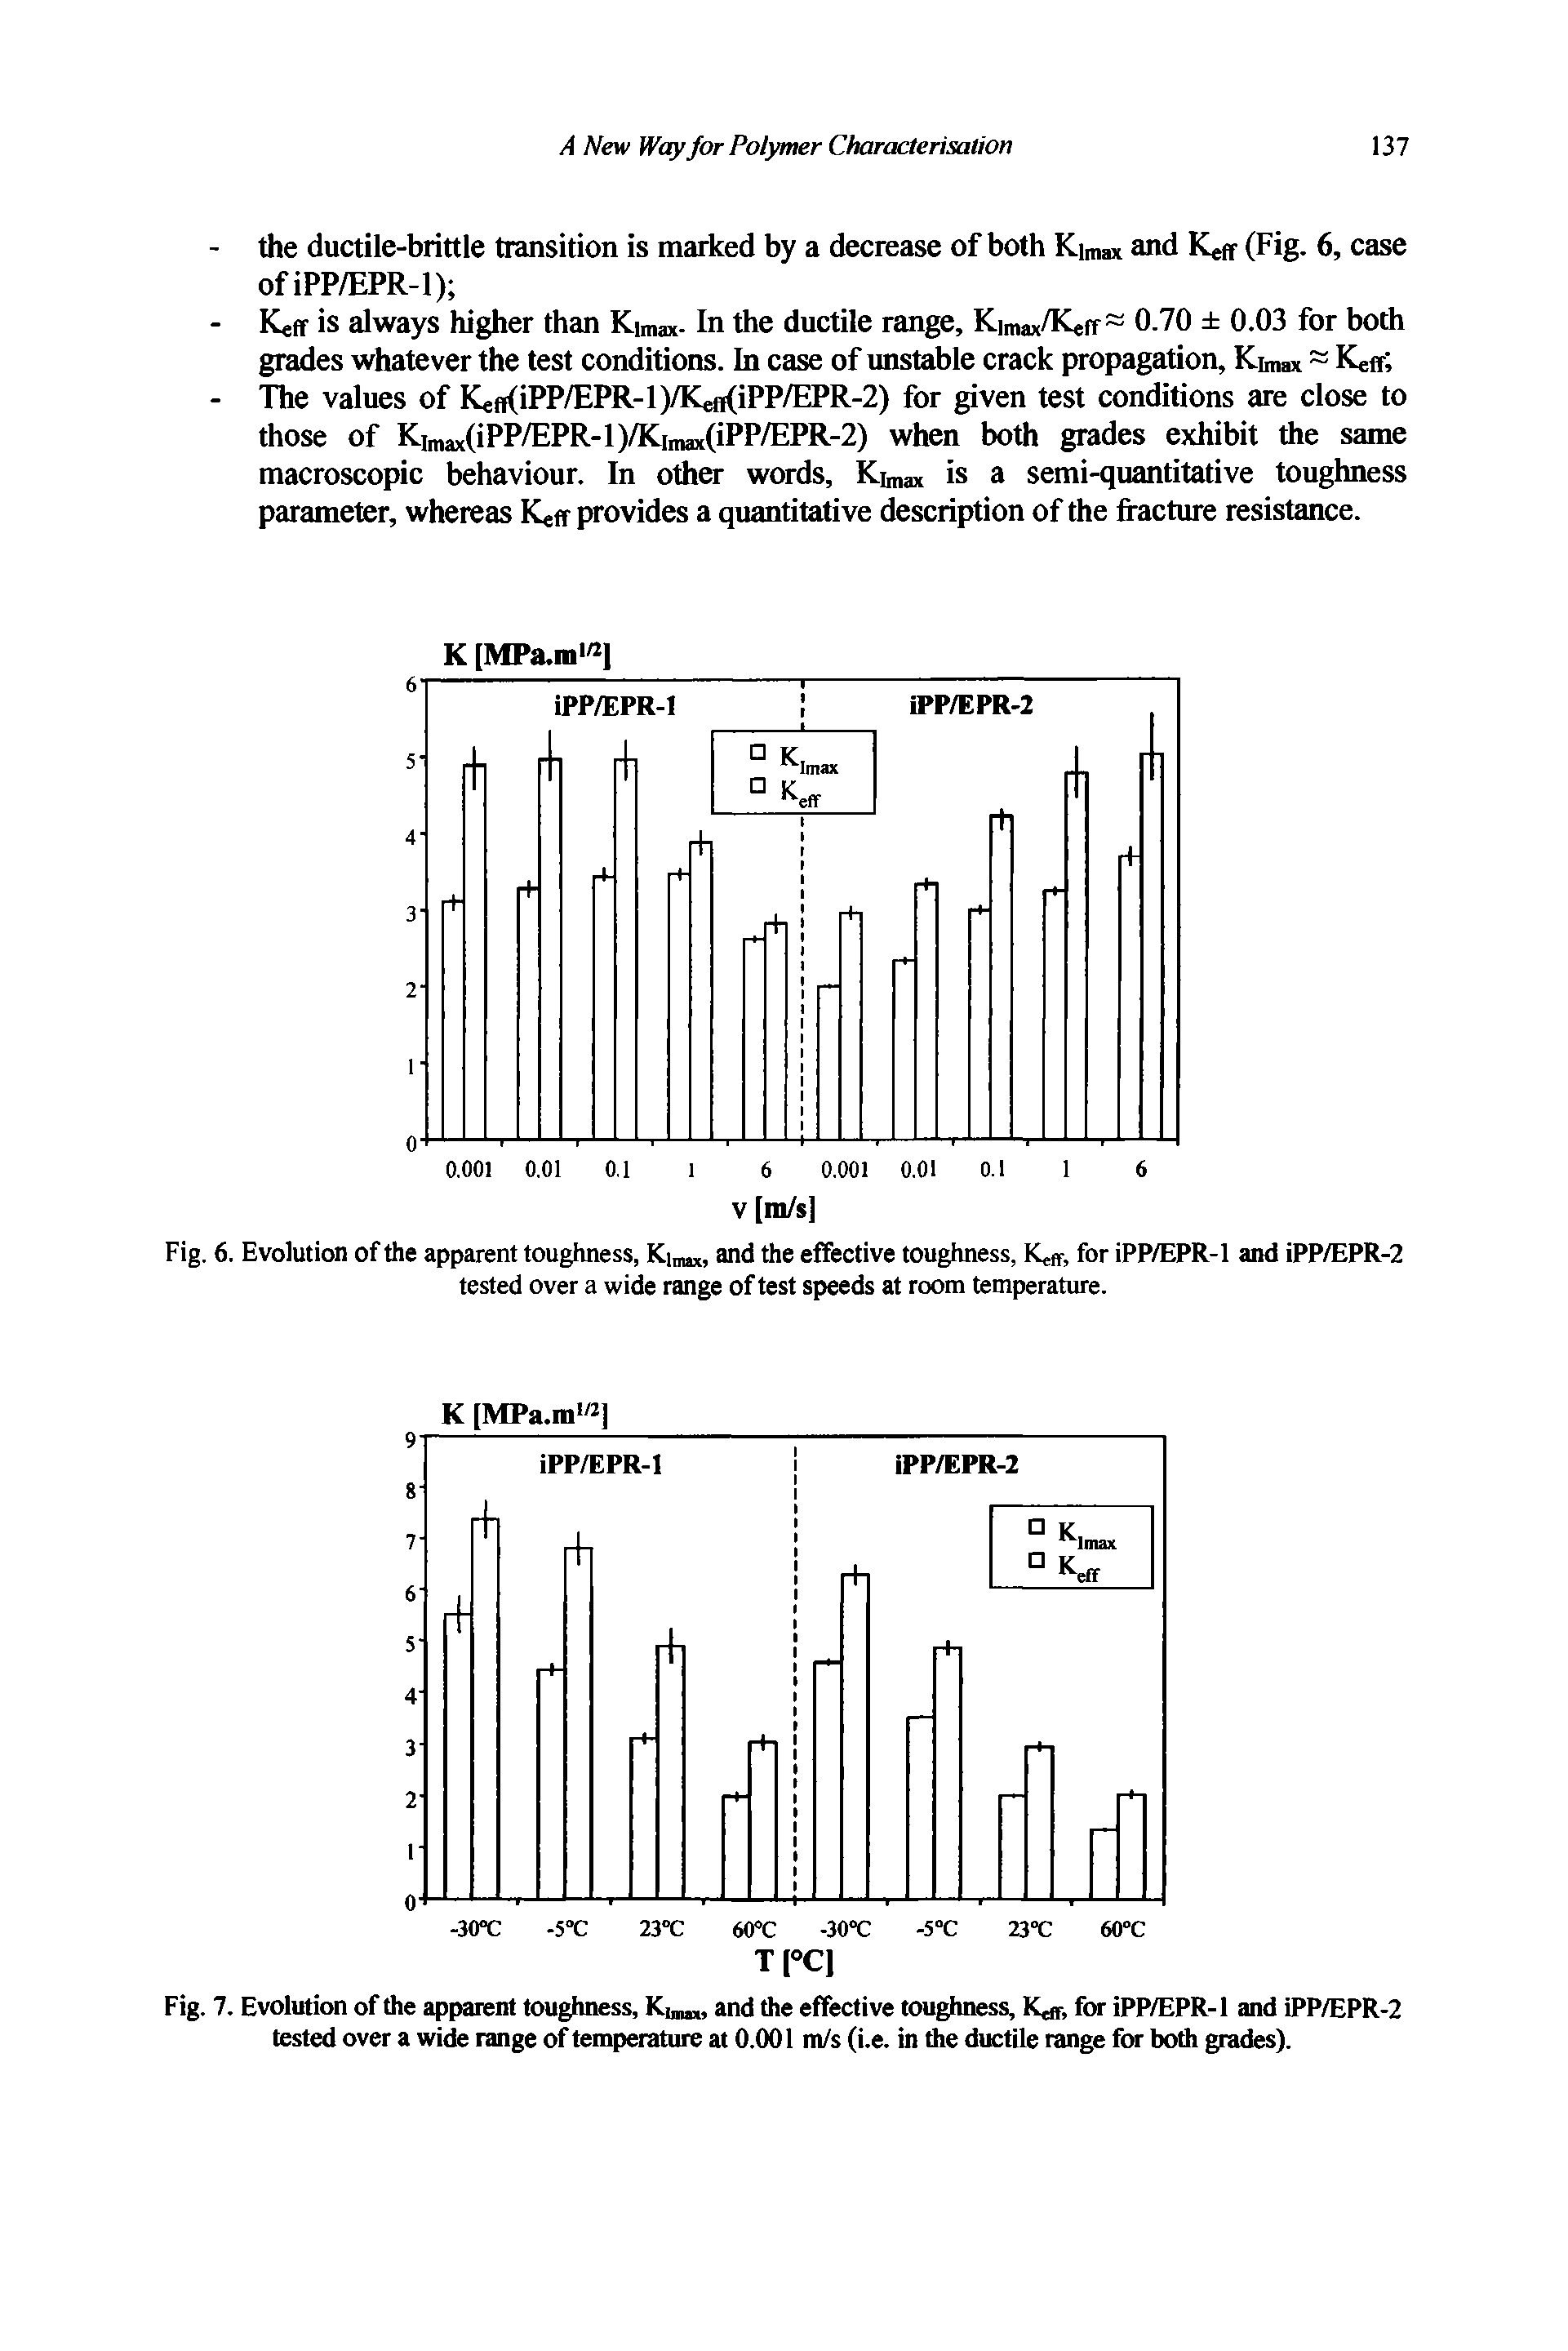 Fig. 6. Evolution of the apparent toughness, Kimm, and the effective toughness, Keir, for iPP/EPR-1 and iPP/EPR-2 tested over a wide range of test speeds at room temperature.